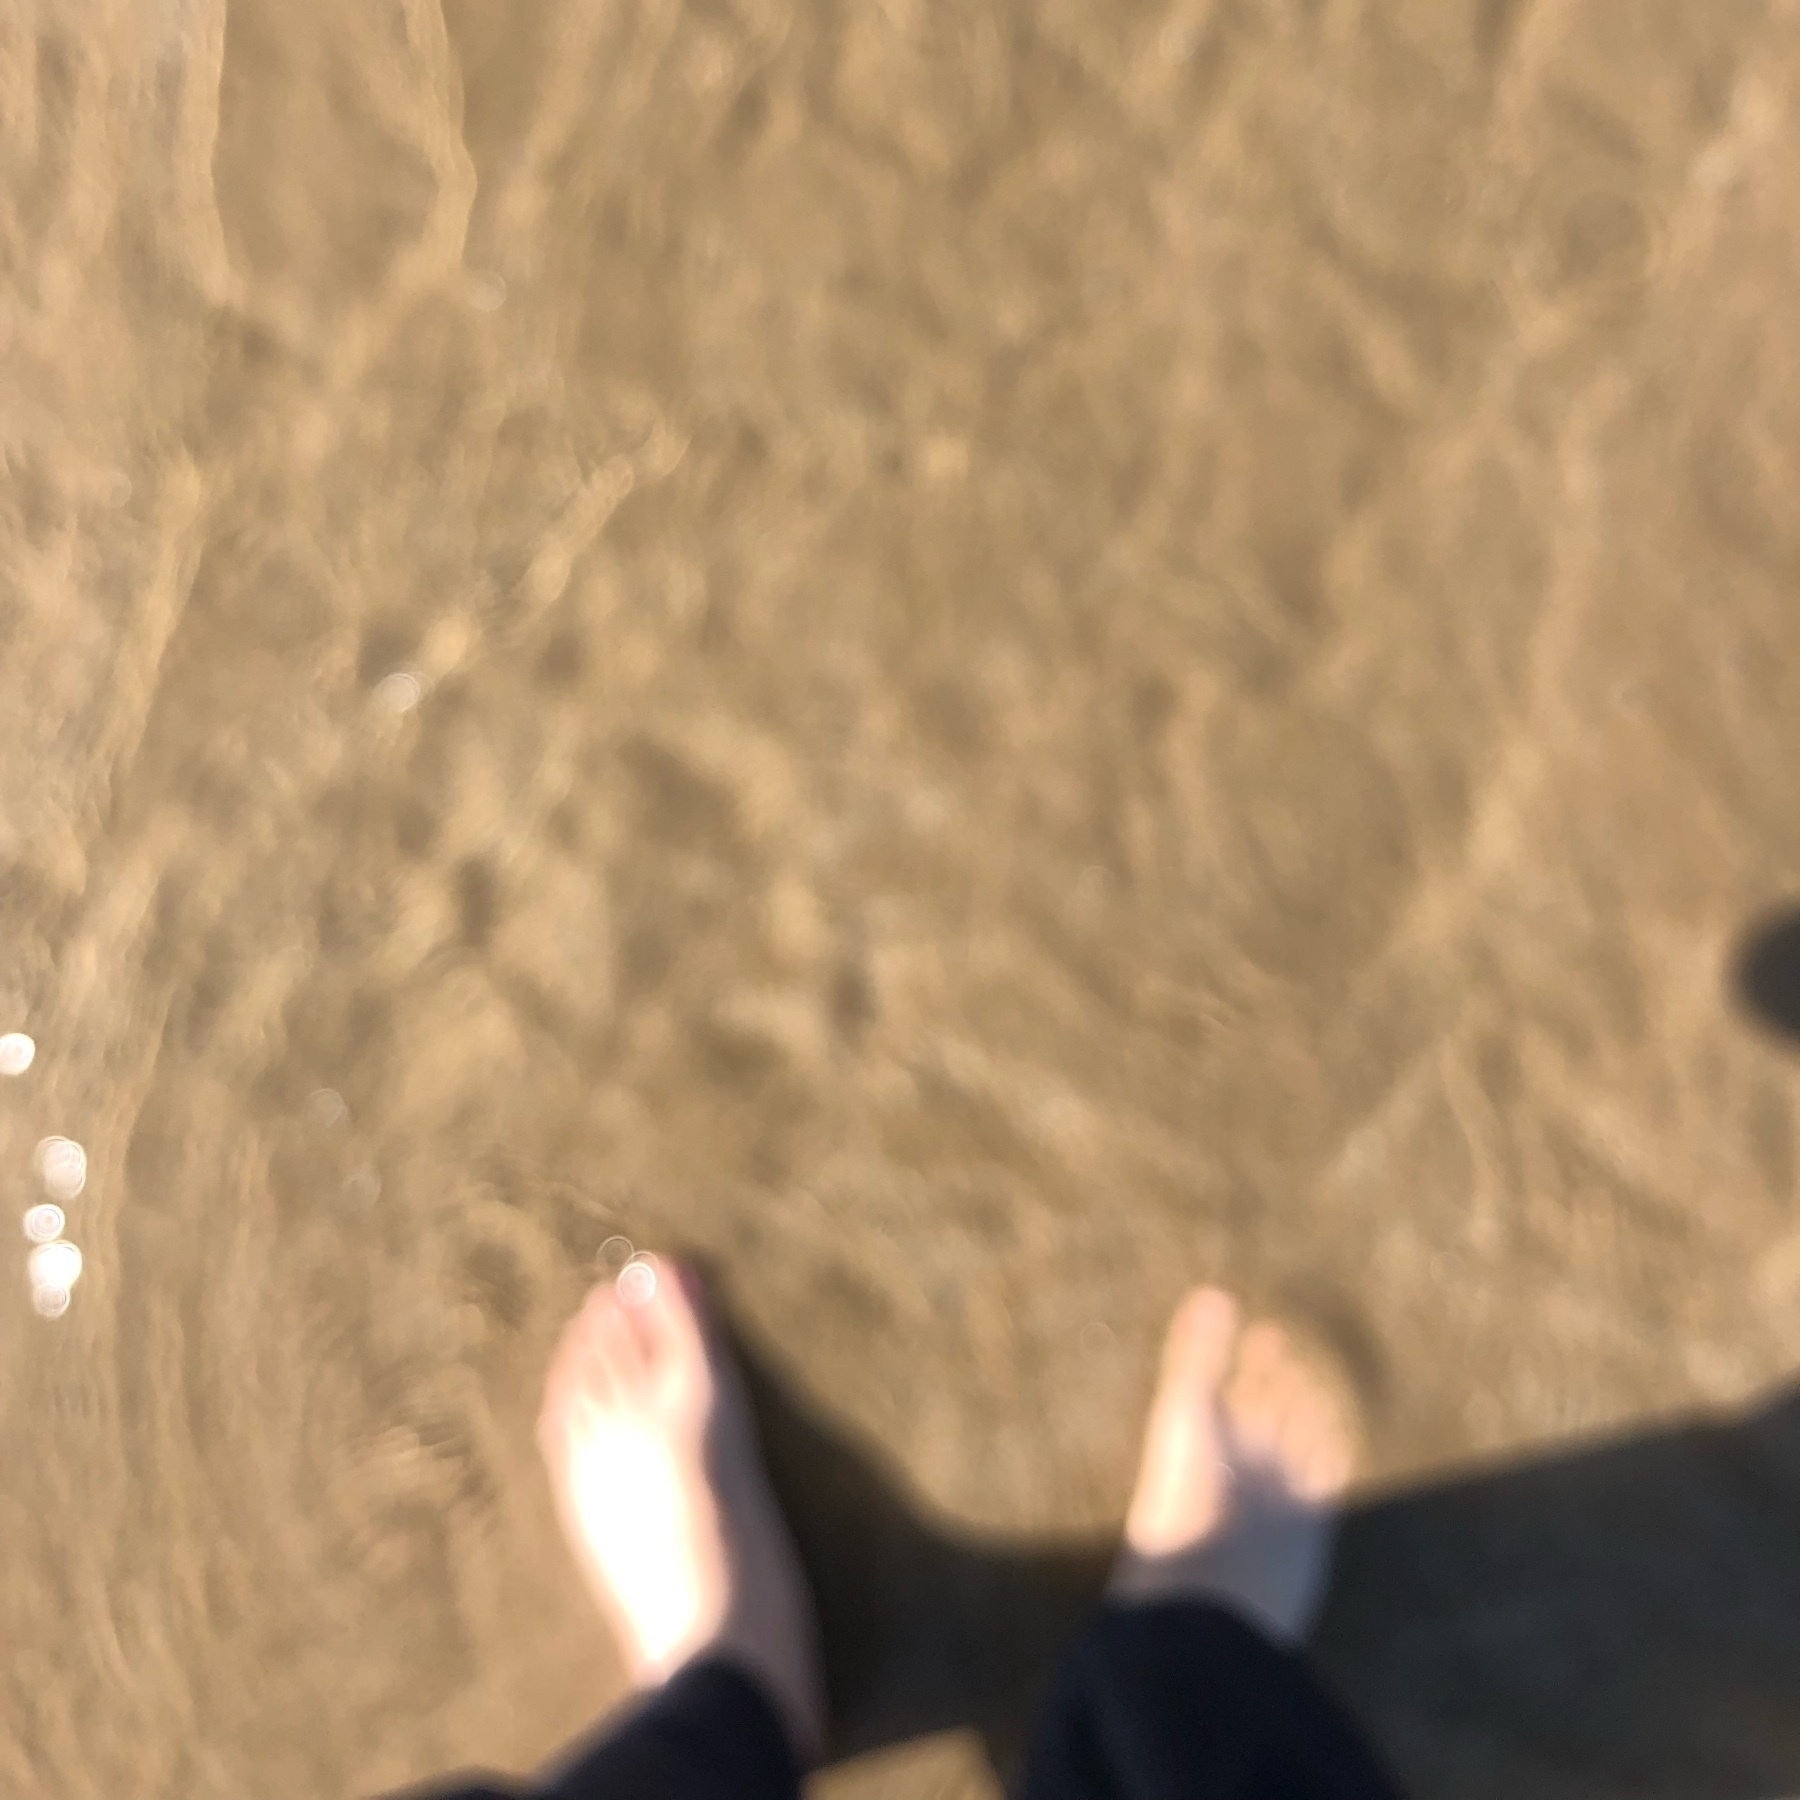 feet in the sand with water over them